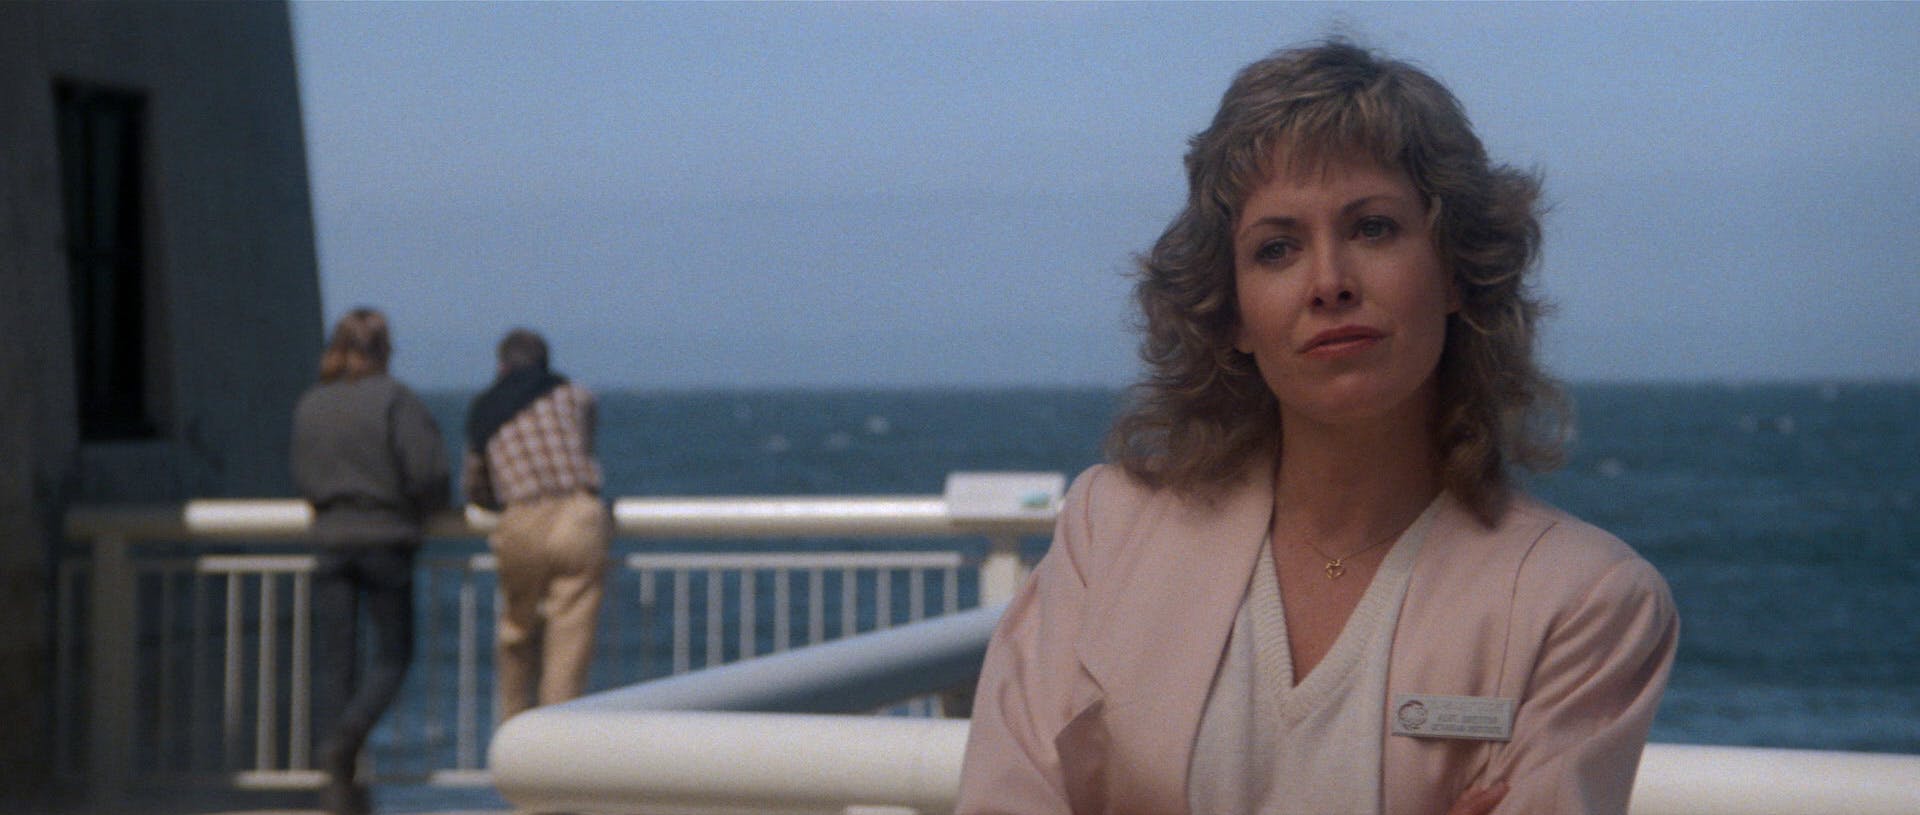 Close-up of Dr. Gillian Taylor at the Cetacean Institute in Star Trek IV: The Voyage Home